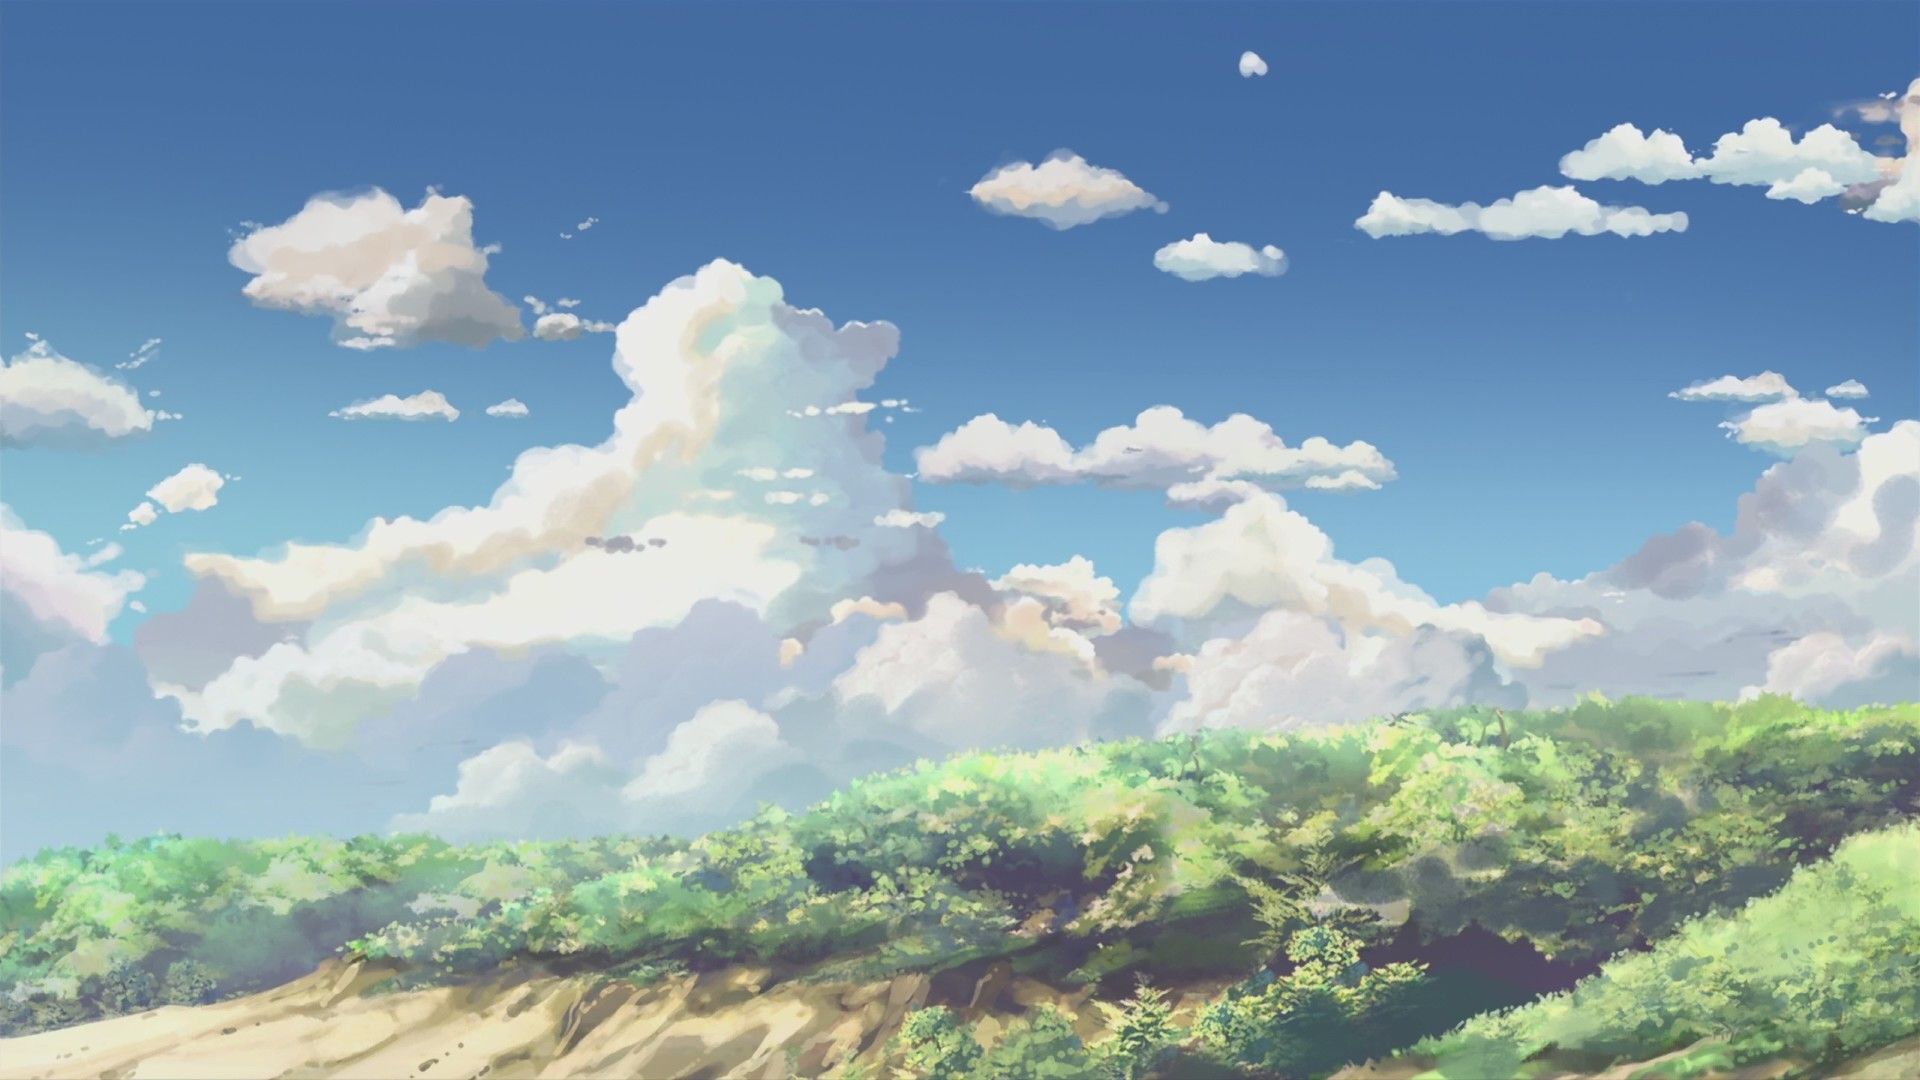 Anime 5 Centimeters Per Second 8k Scenery Background